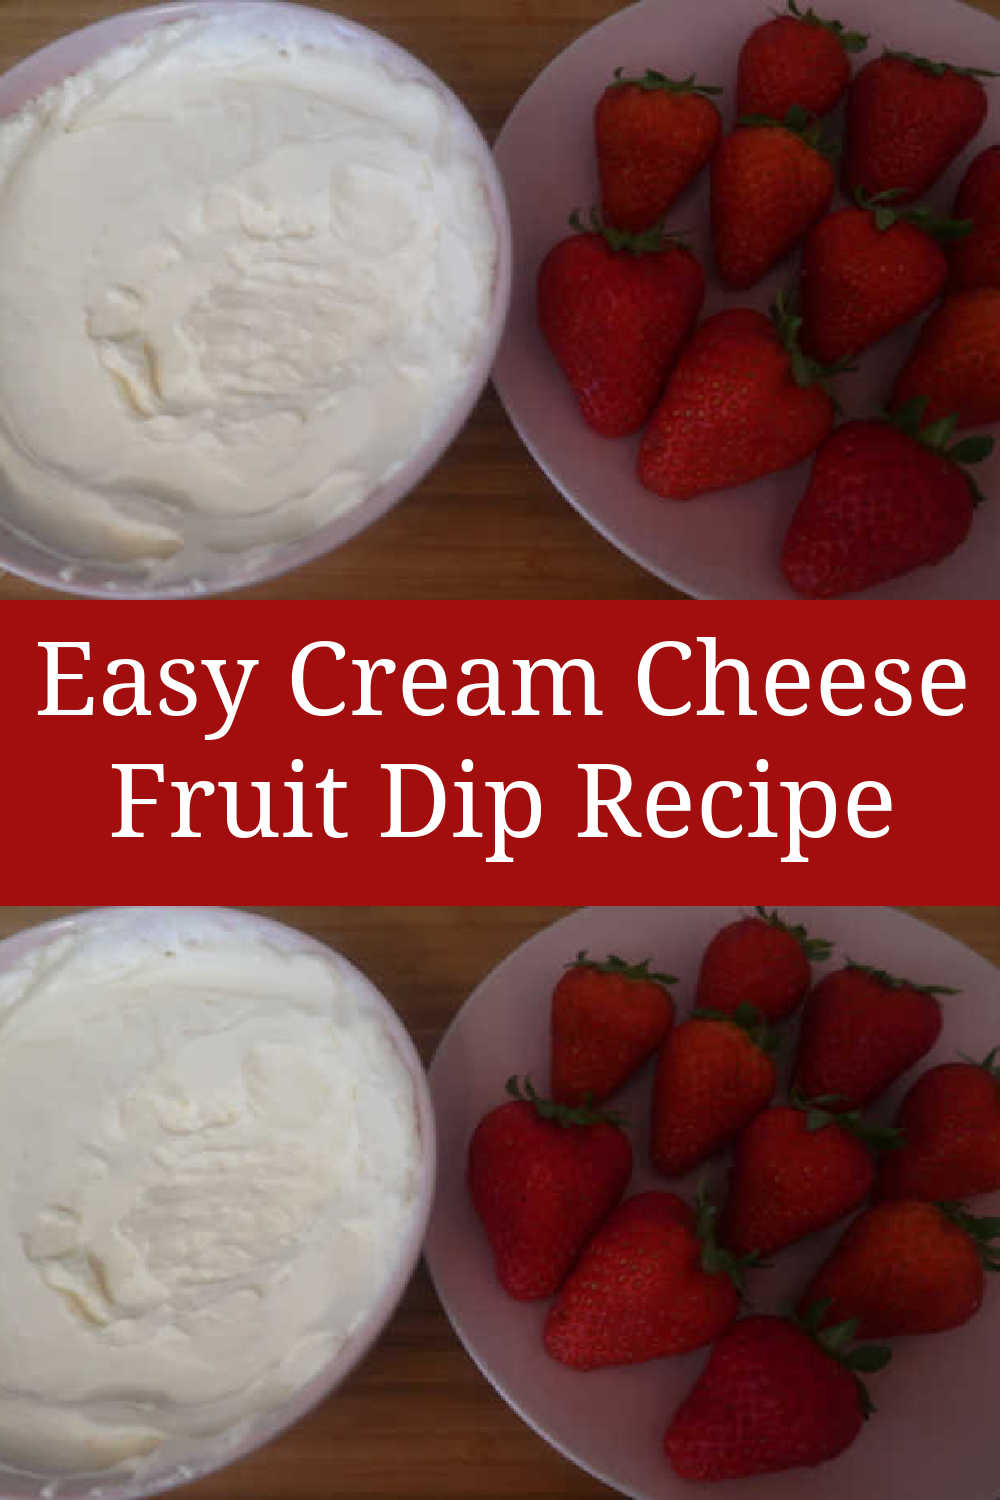 Easy Cream Cheese Fruit Dip Recipe - how to make a quick fluffy no bake dessert with only 4 ingredients - with the video tutorial.